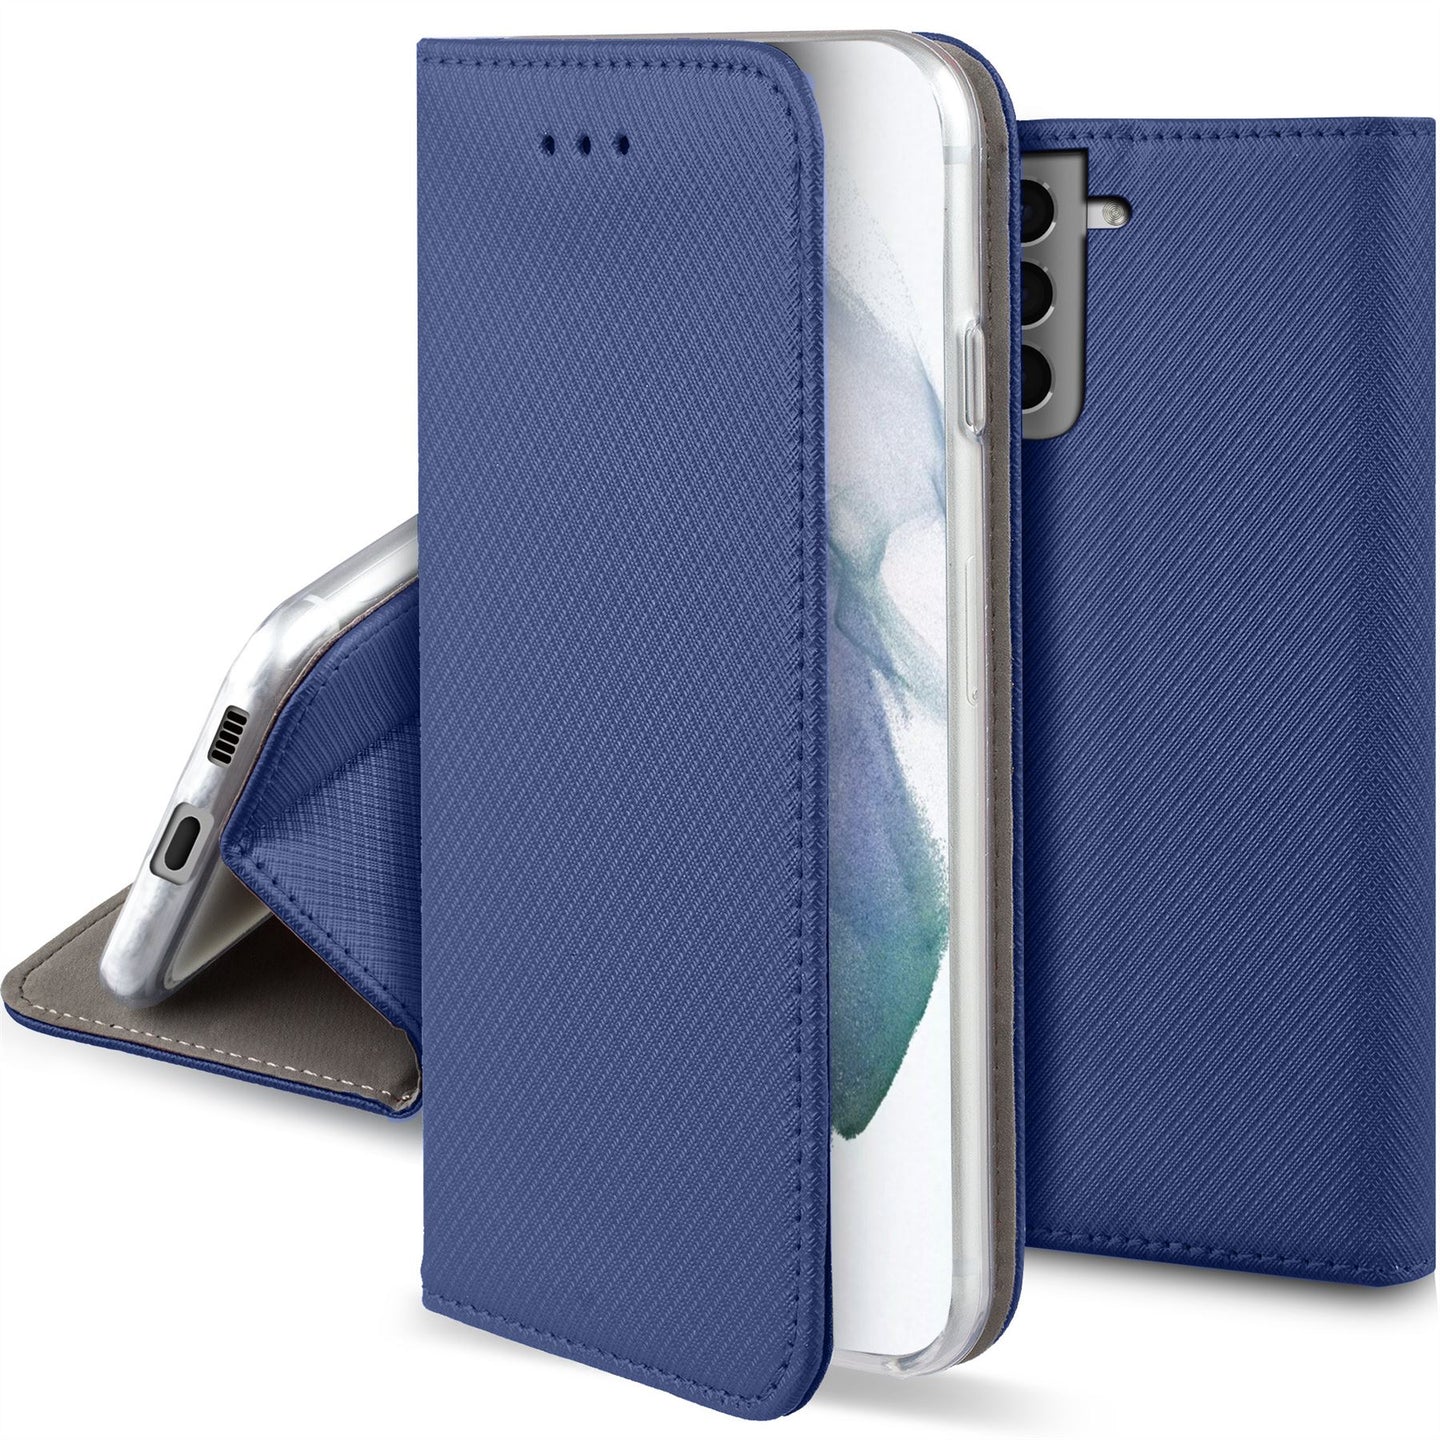 Moozy Case Flip Cover for Samsung S21 5G, Samsung S21, Dark Blue - Smart Magnetic Flip Case with Card Holder and Stand